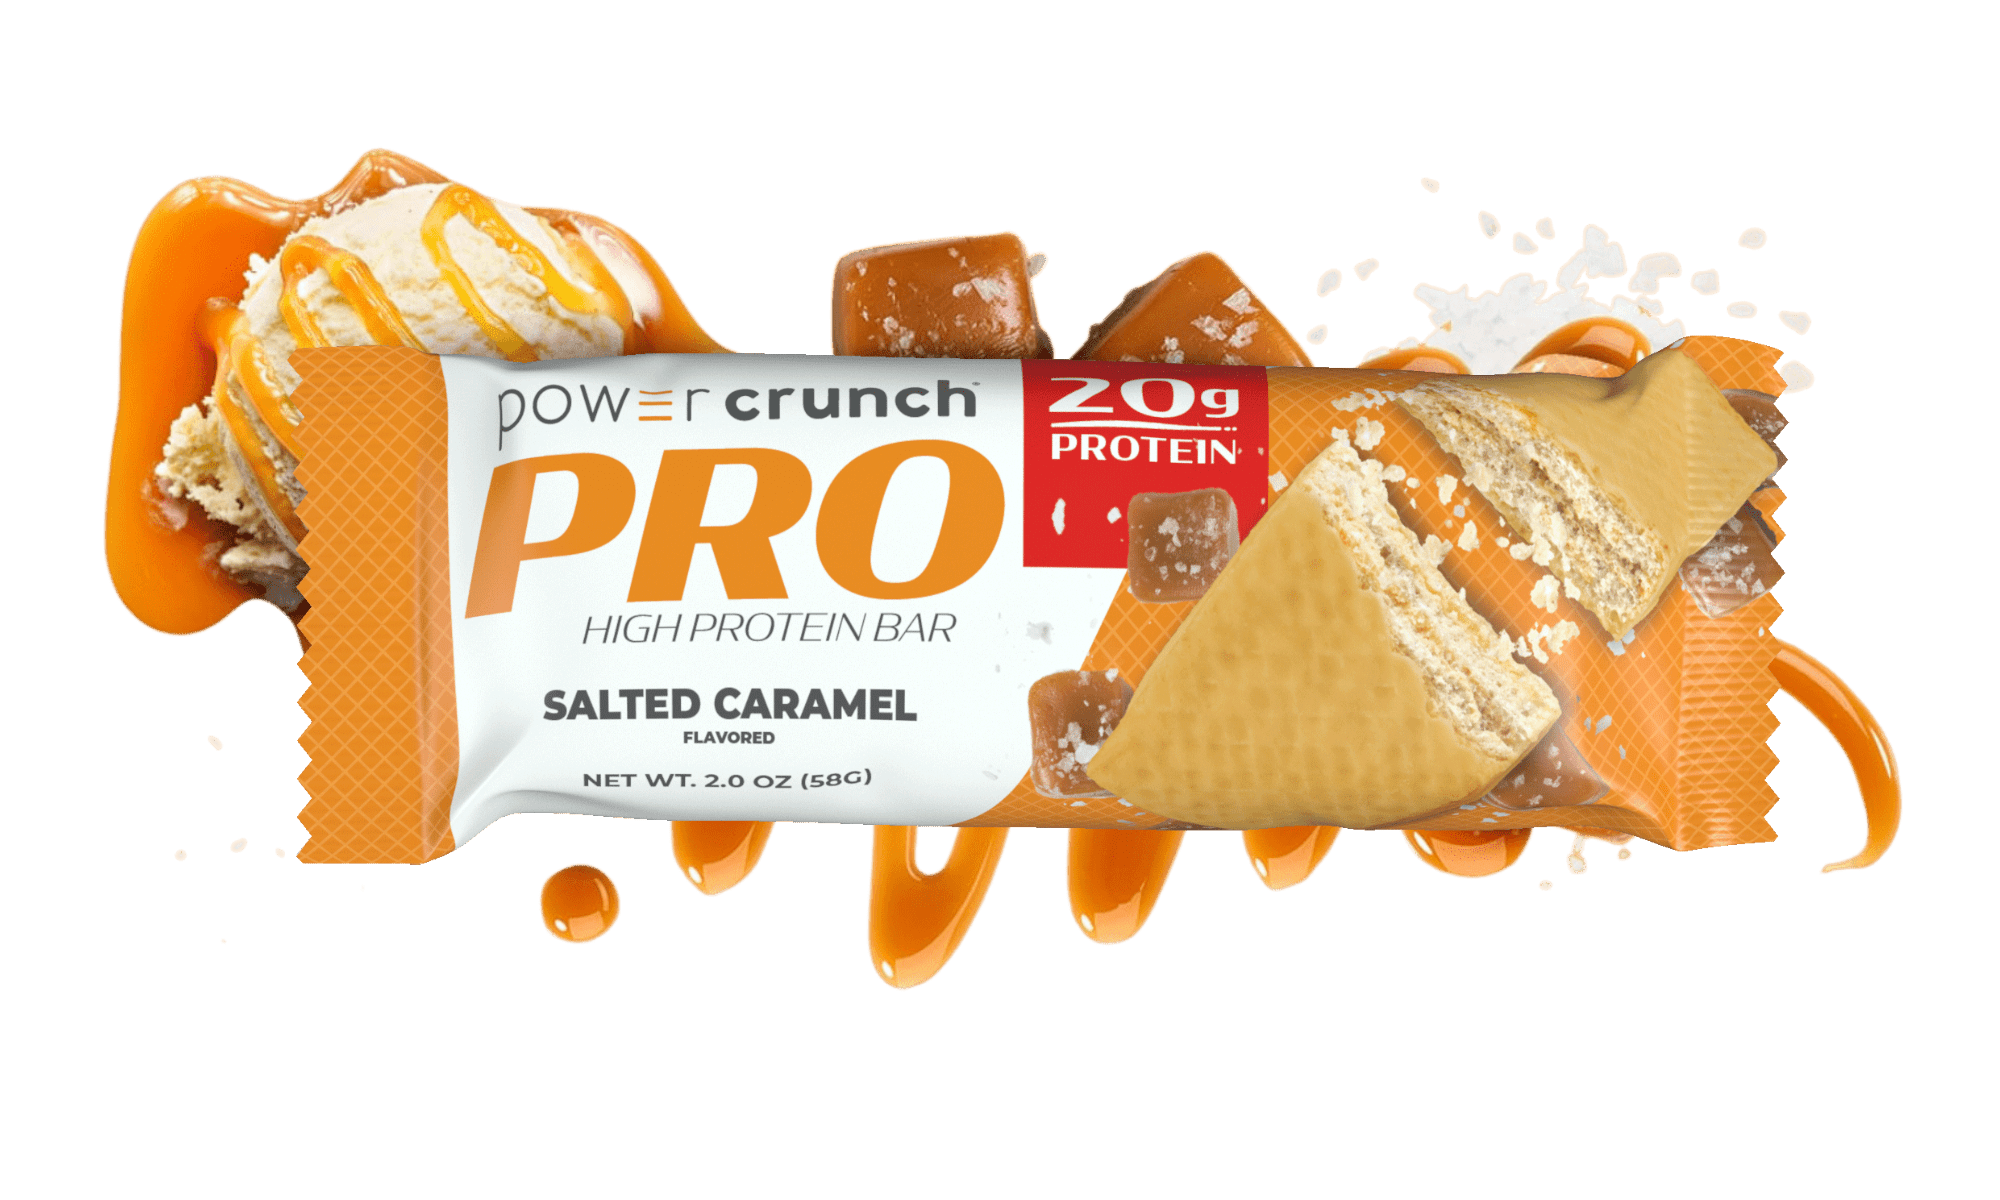 Power Crunch PRO Salted Caramel 20g protein bars pictured with Salted Caramel flavor explosion